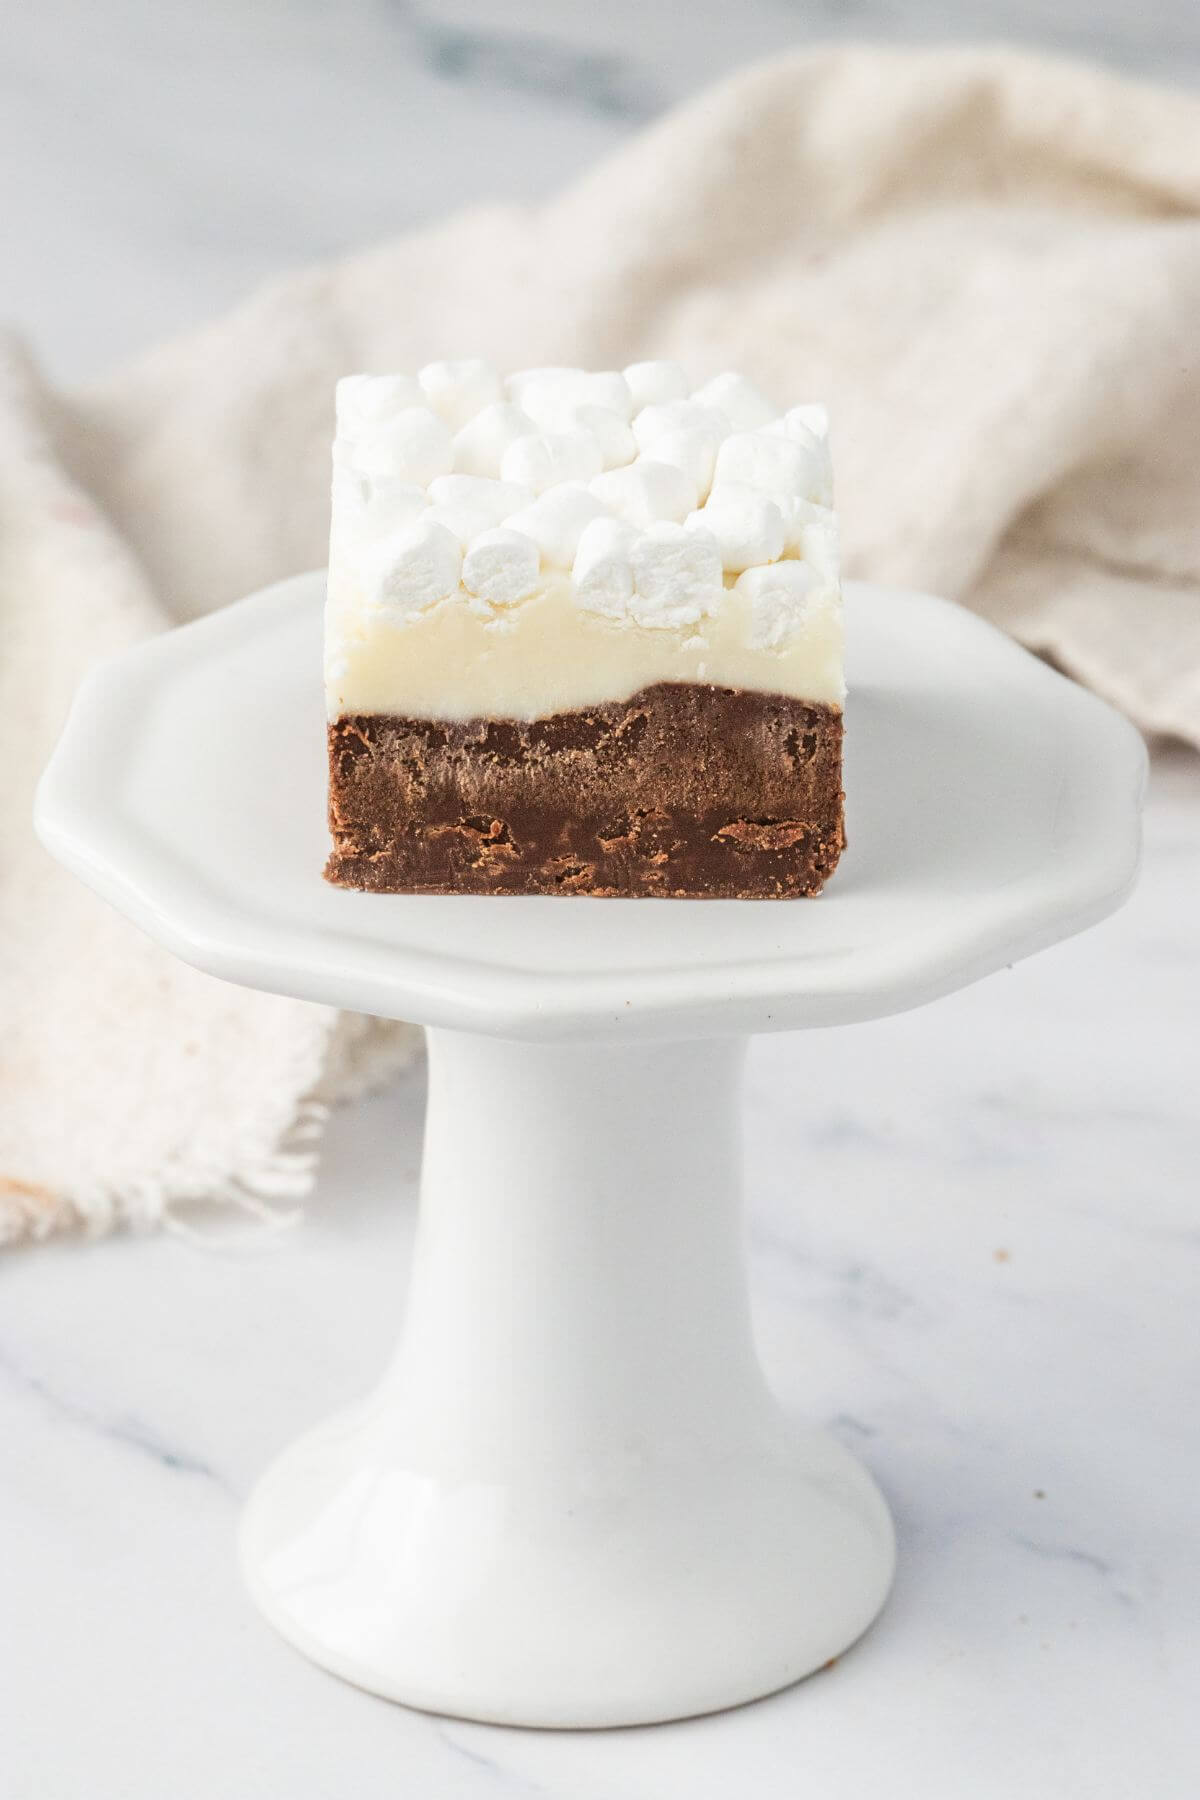 Hot Chocolate Fudge with marshmallows served on pedestal dish.